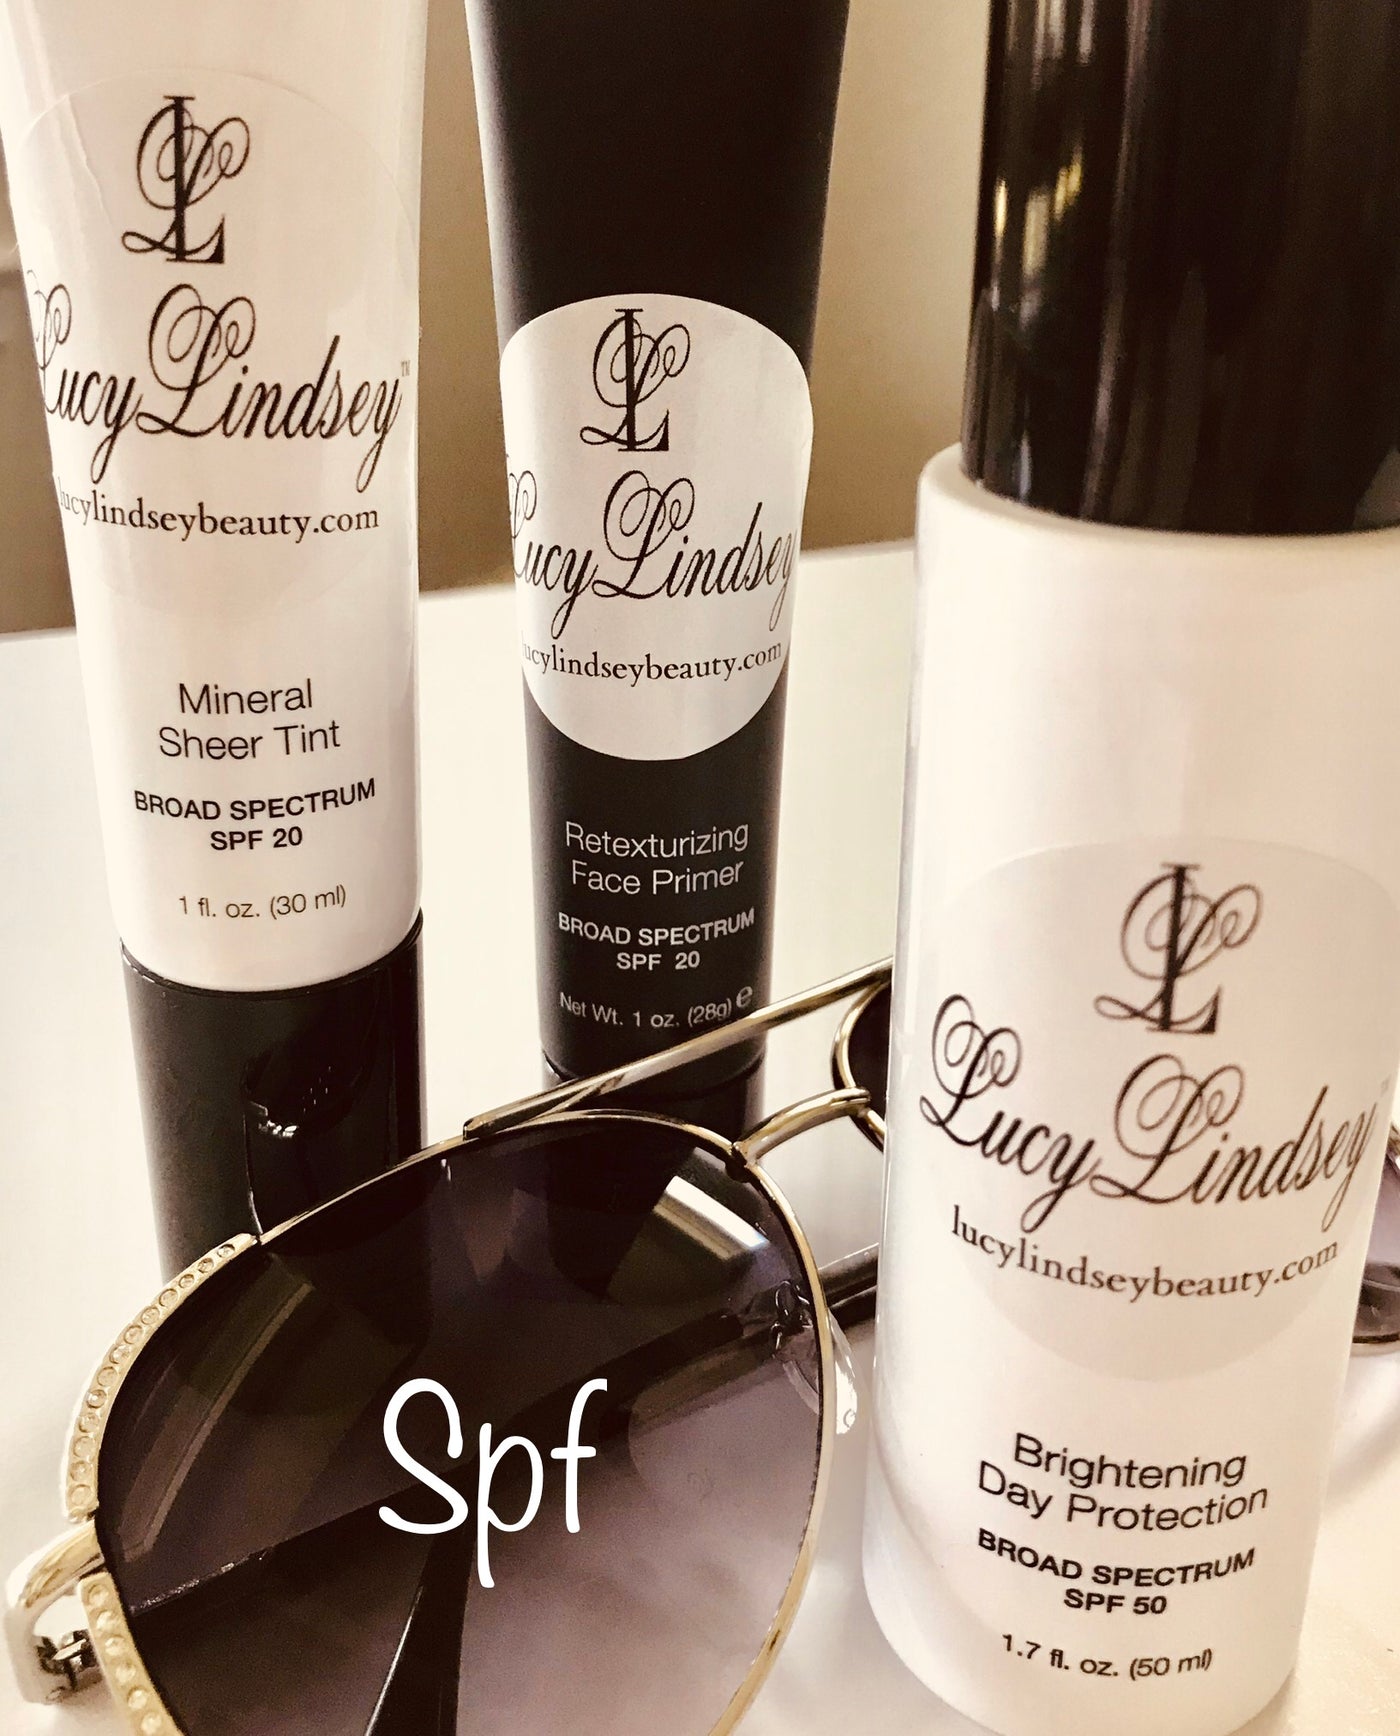 Three SPF coverages, offering the perfect protection. Double layer Retexturizing primer followed by Mineral sheer tint. Giving double protection with a bit more coverage.